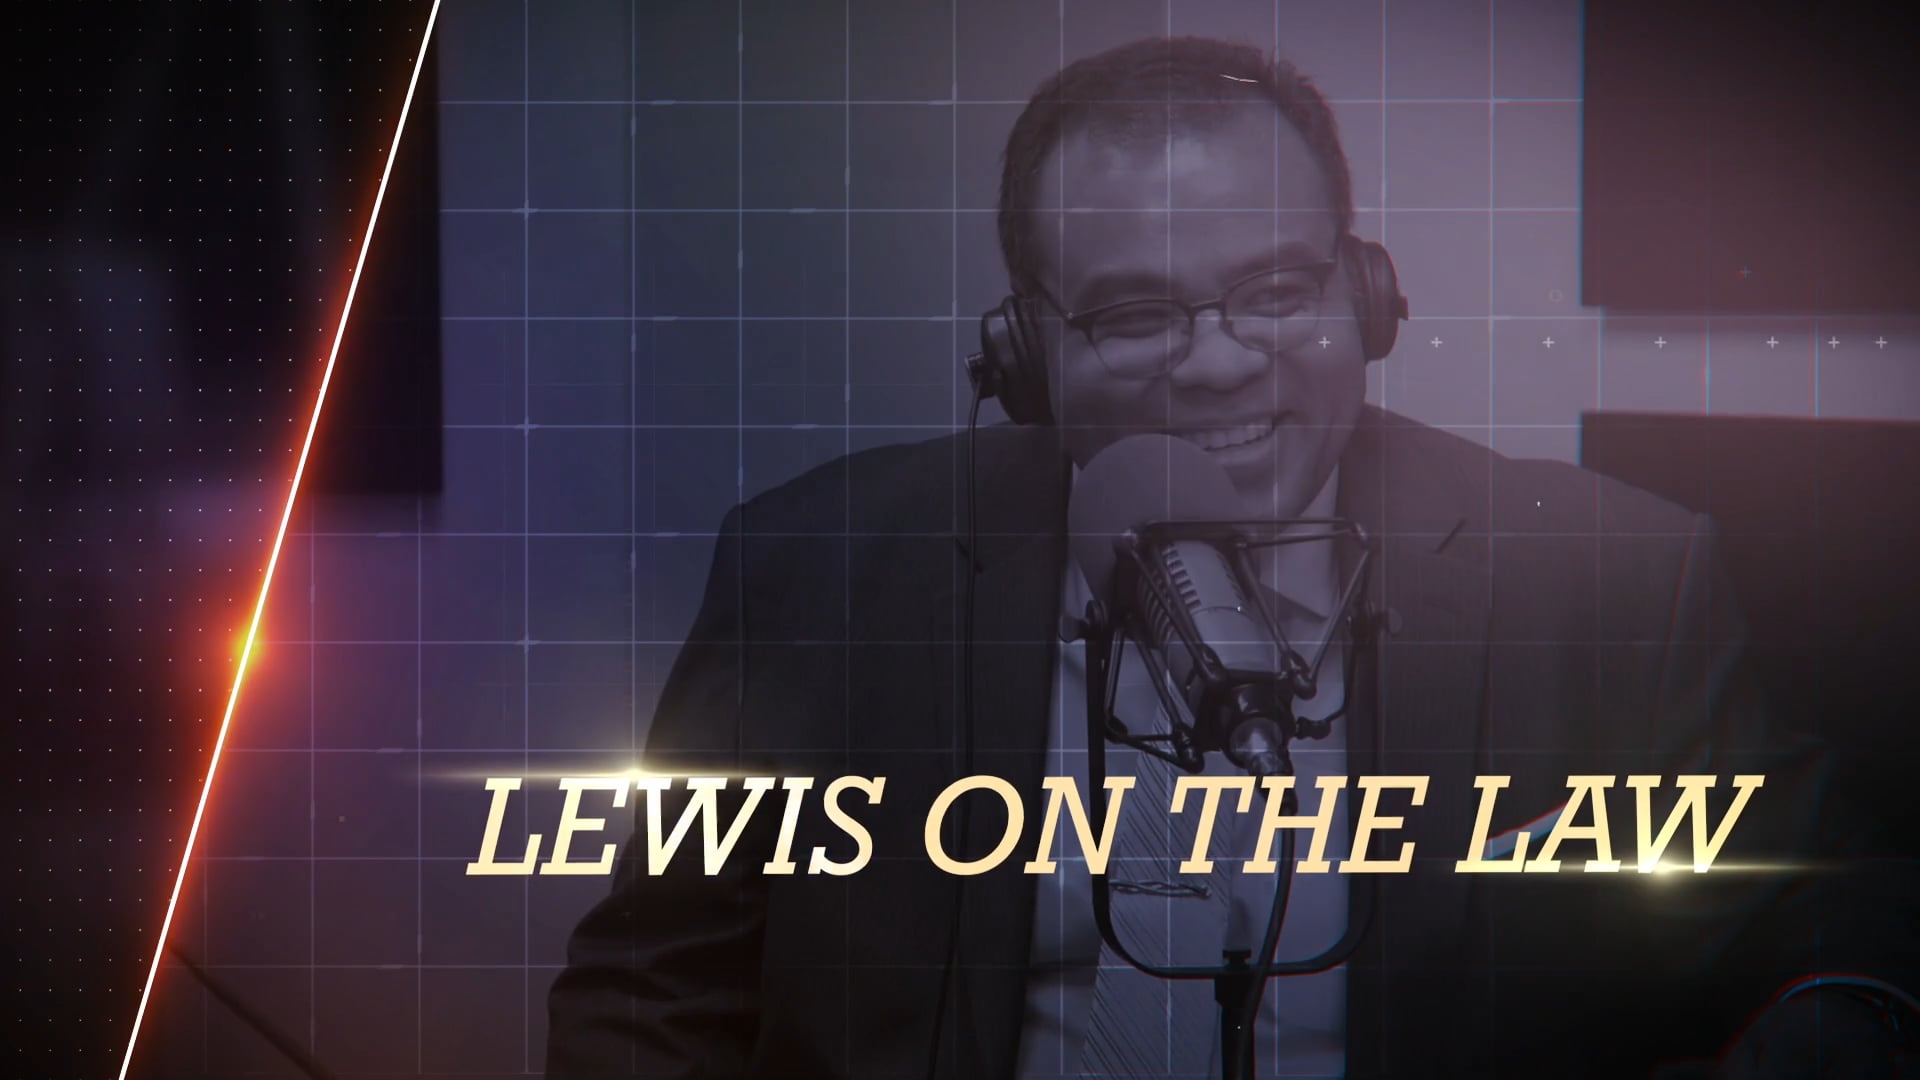 EB - 5 Immigration Law: Lewis On The Law